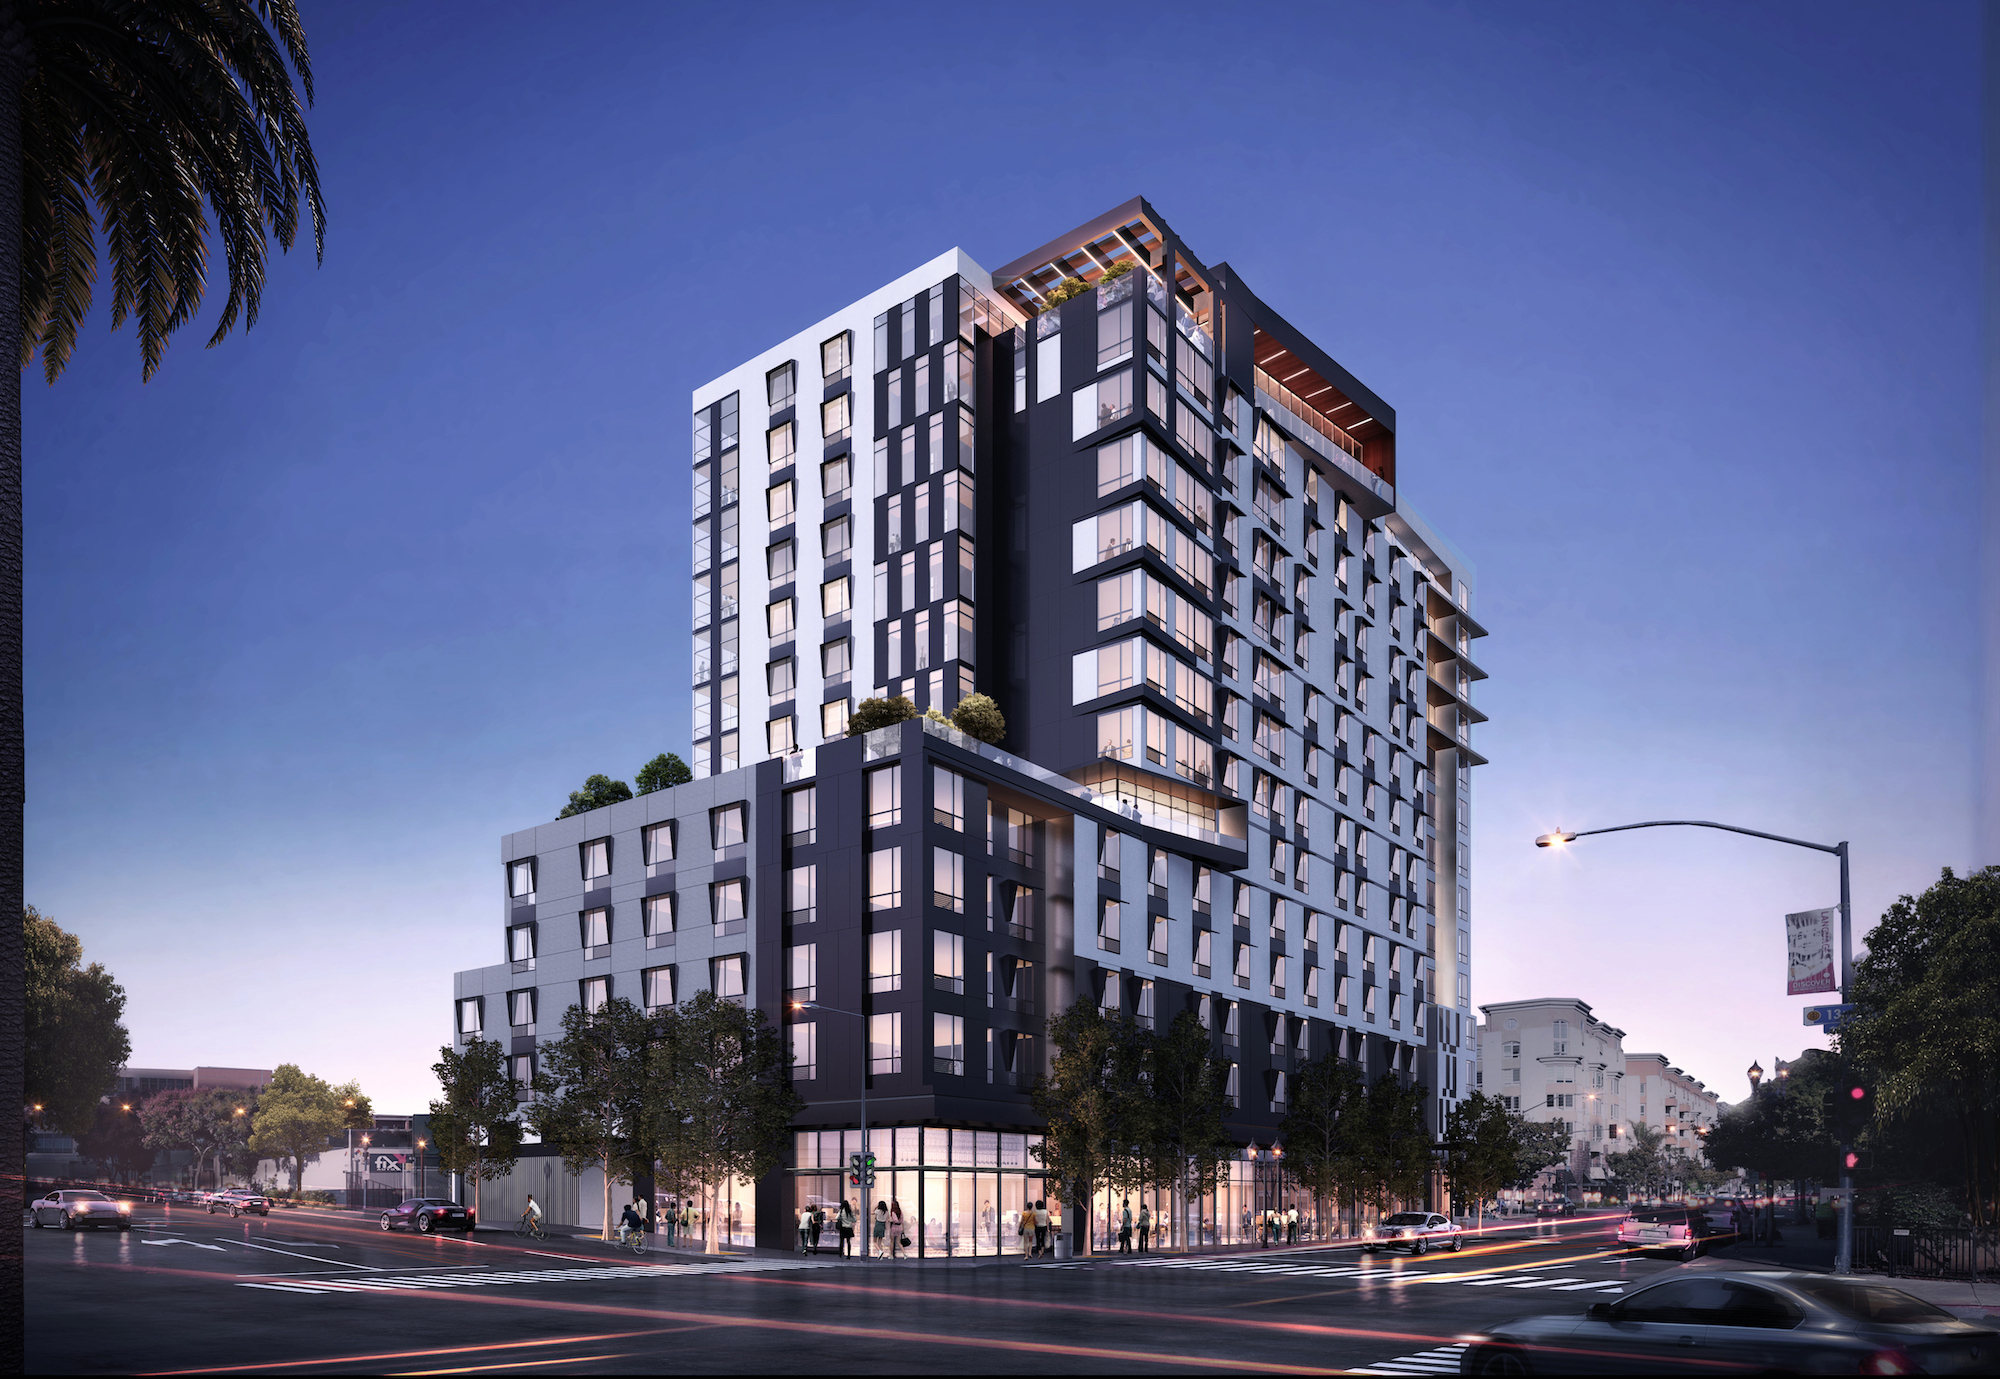 Rendering of the 14-story mixed-use development planned by Chelsea Investment Corp. and Father Joe’s Villages. (Credit: Joseph Wong Design Associates)